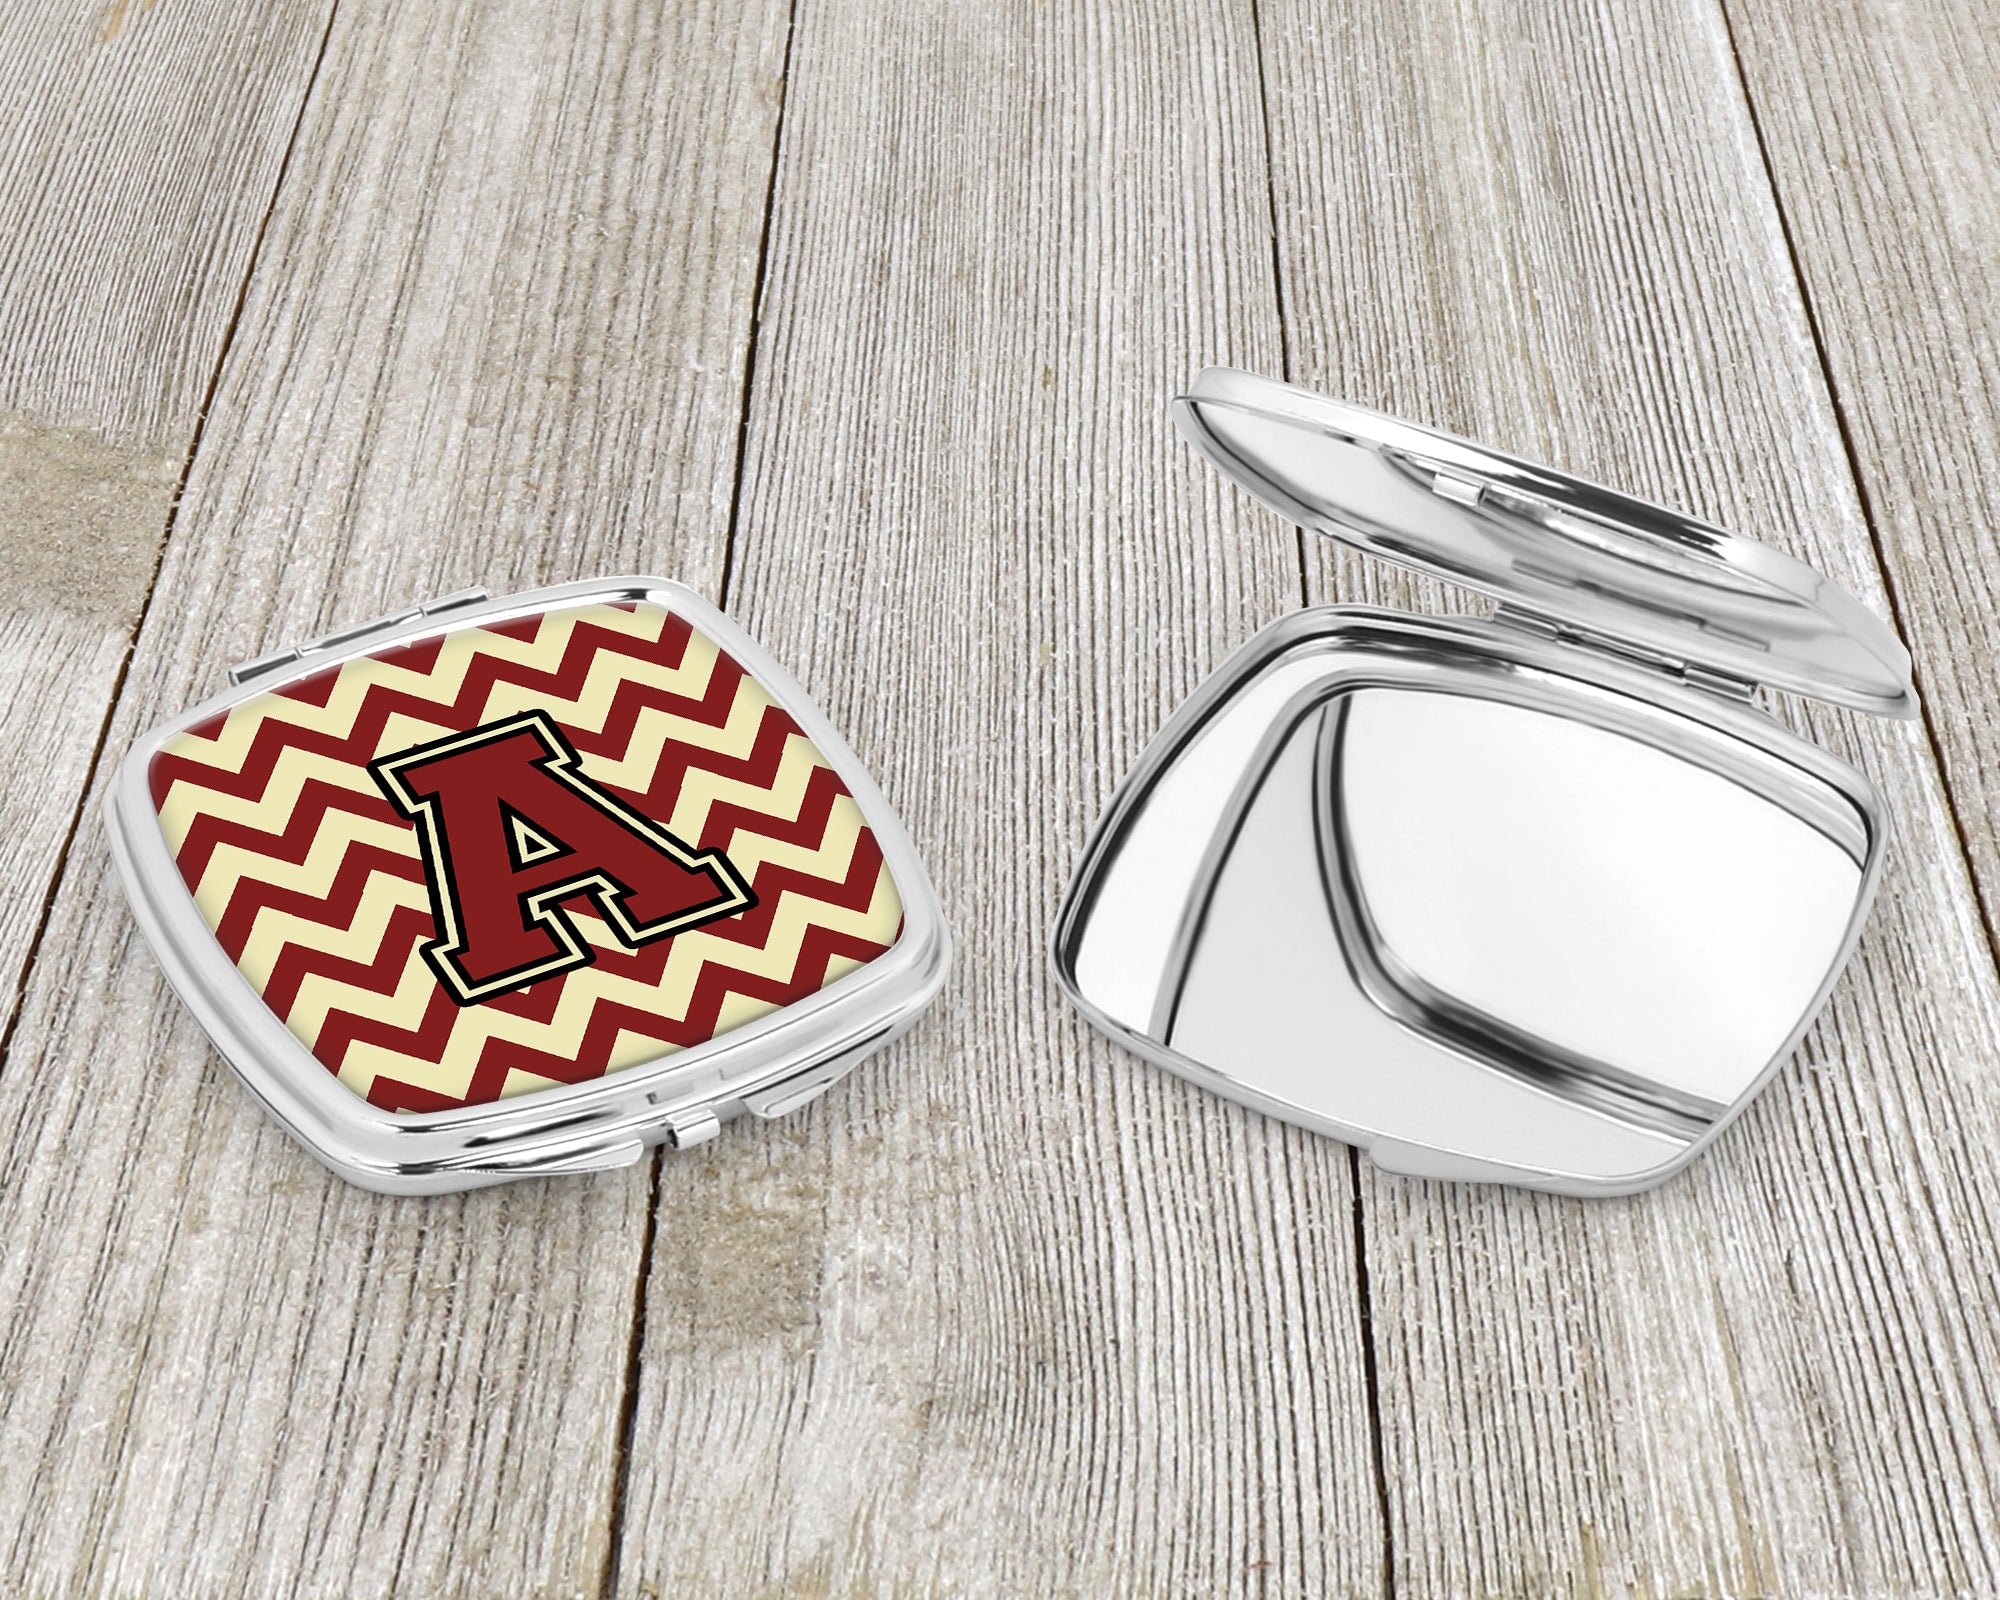 Letter A Chevron Maroon and Gold Compact Mirror CJ1061-ASCM  the-store.com.